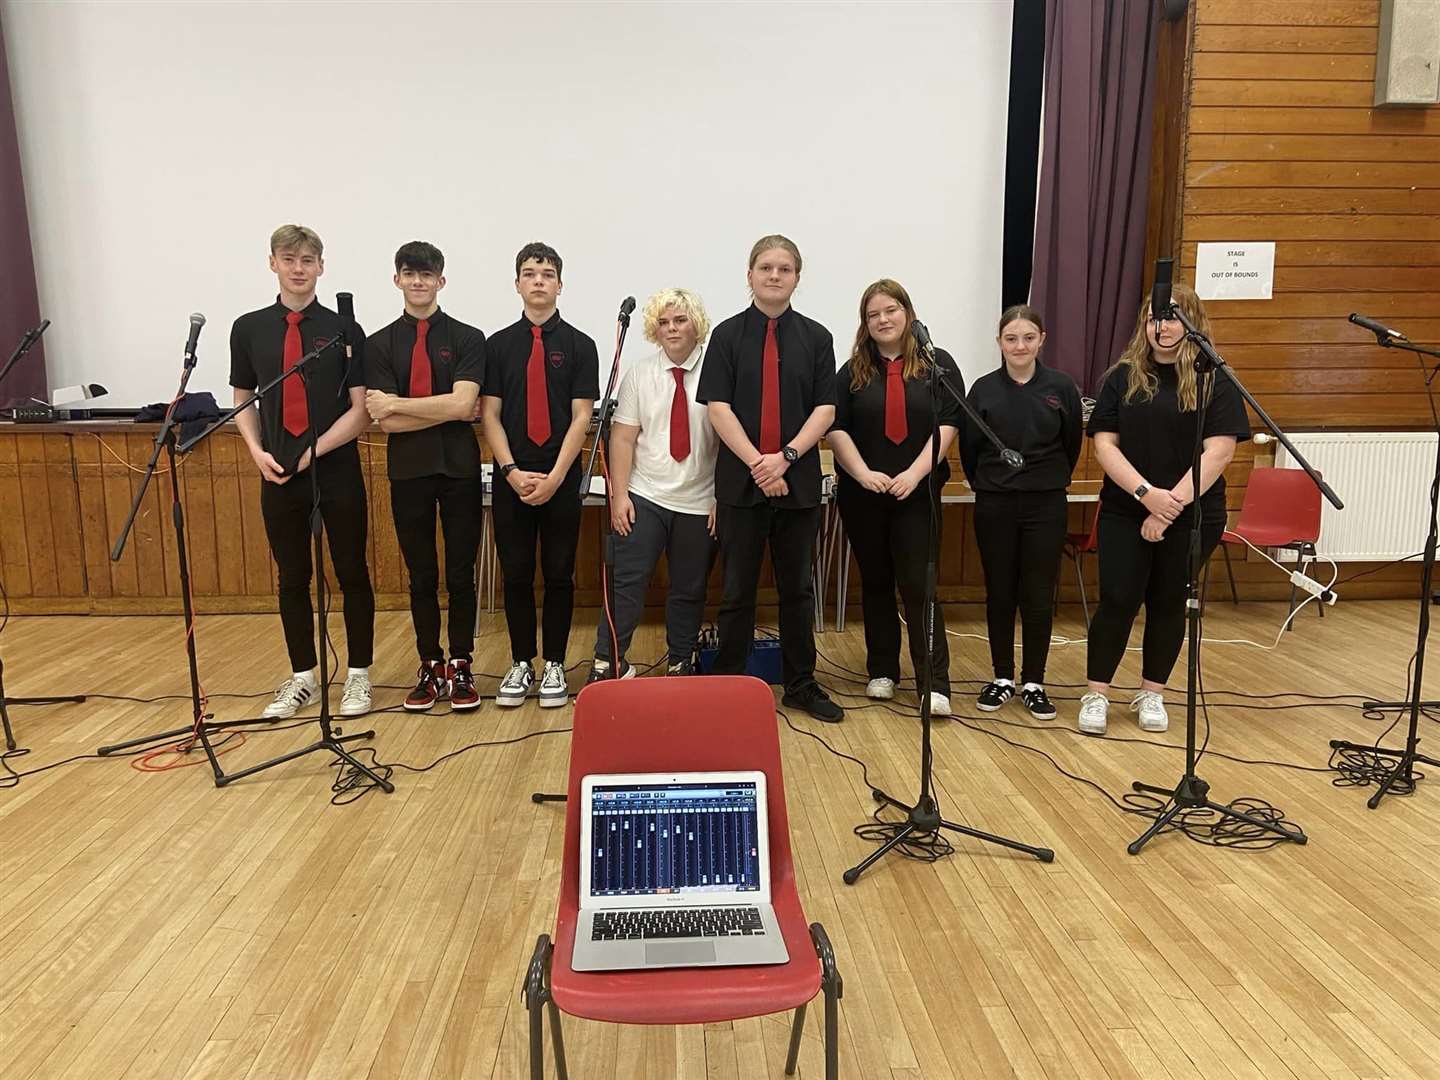 The equipment purchased will help pupils learn about music technology.